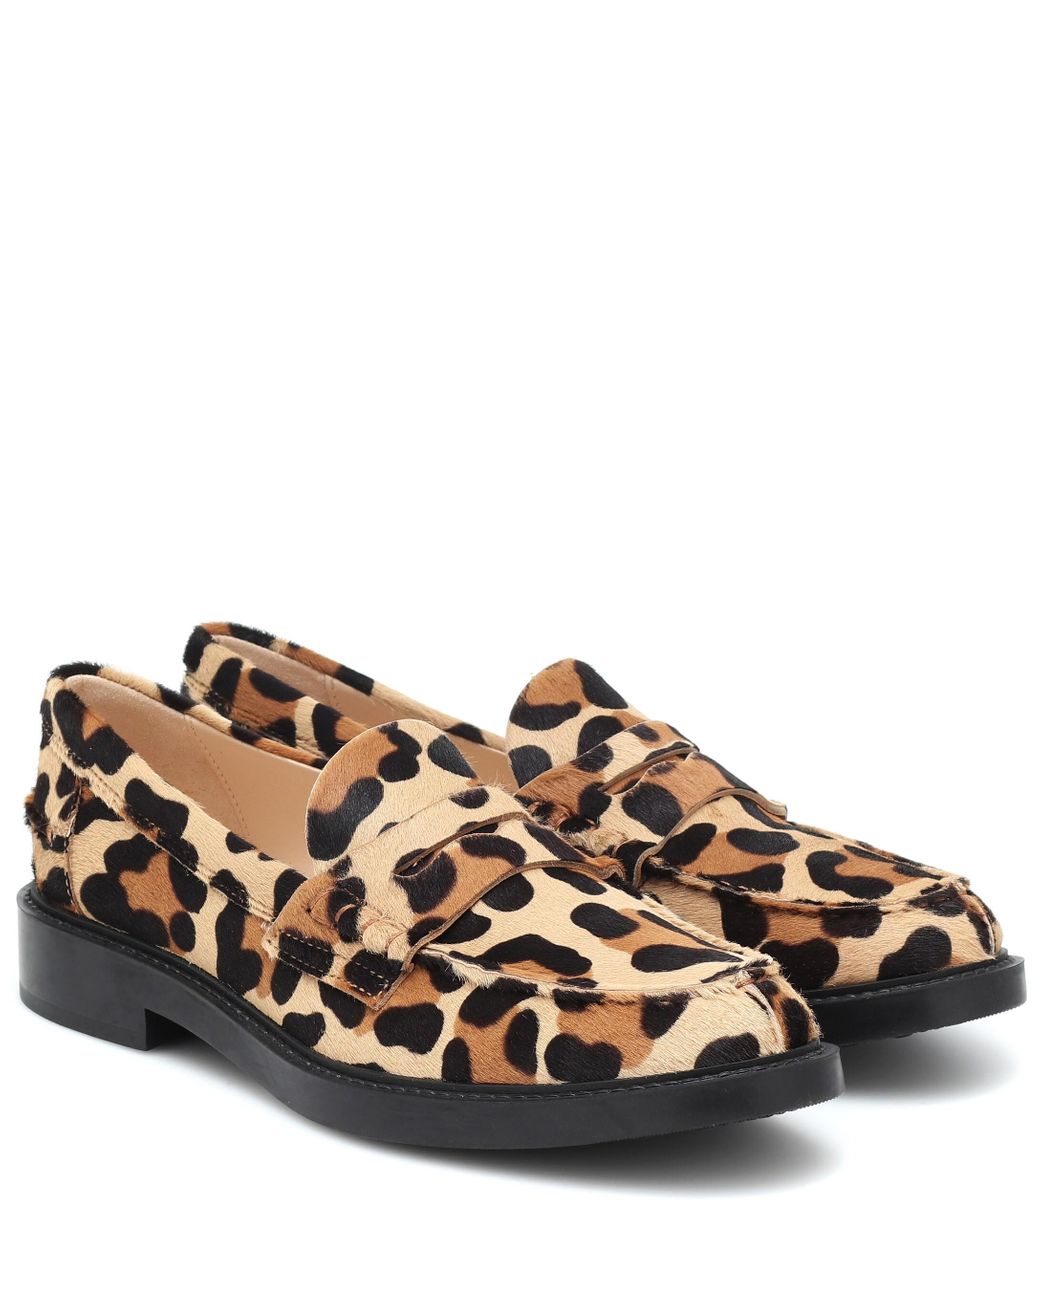 Tod's Leopard-print Calf Hair Loafers in Brown - Lyst